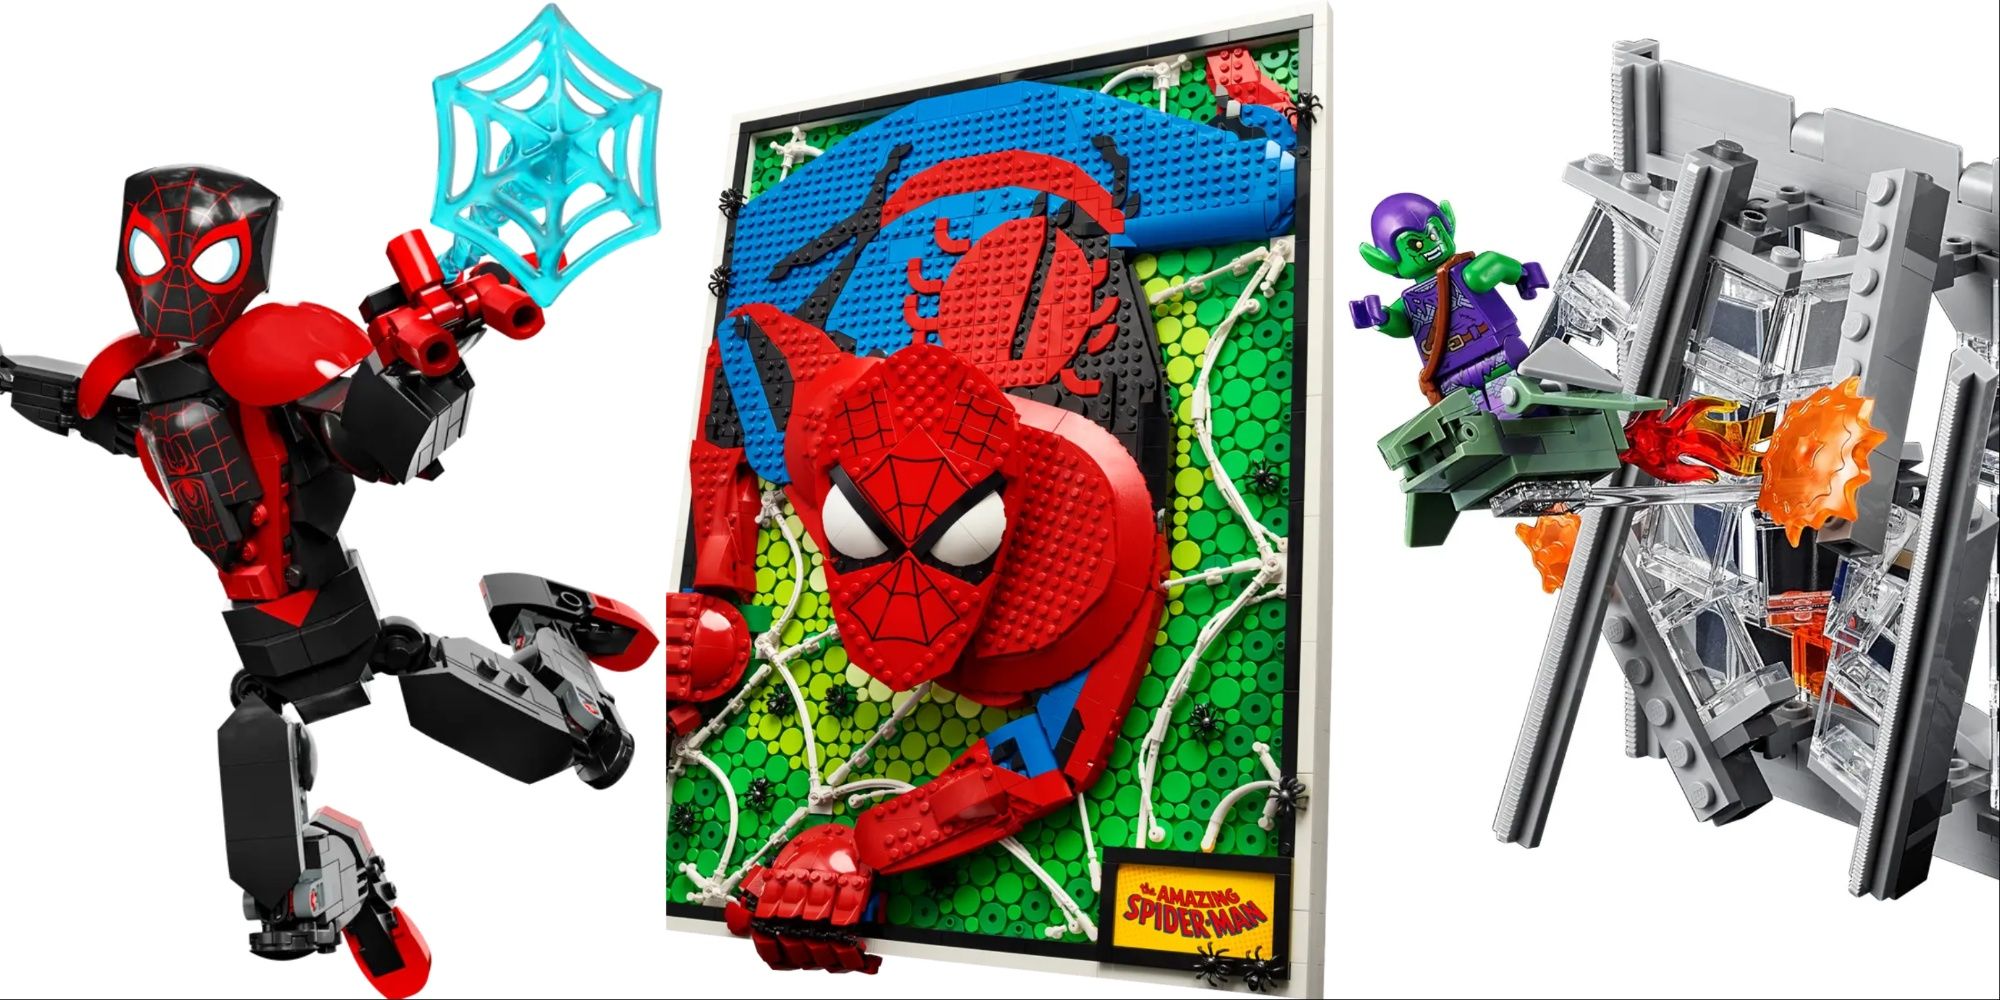 Best Spider-Man Lego Sets Featured Split Image Featuring Miles Morales, Amazing Spider-Man Art, and Green Goblin